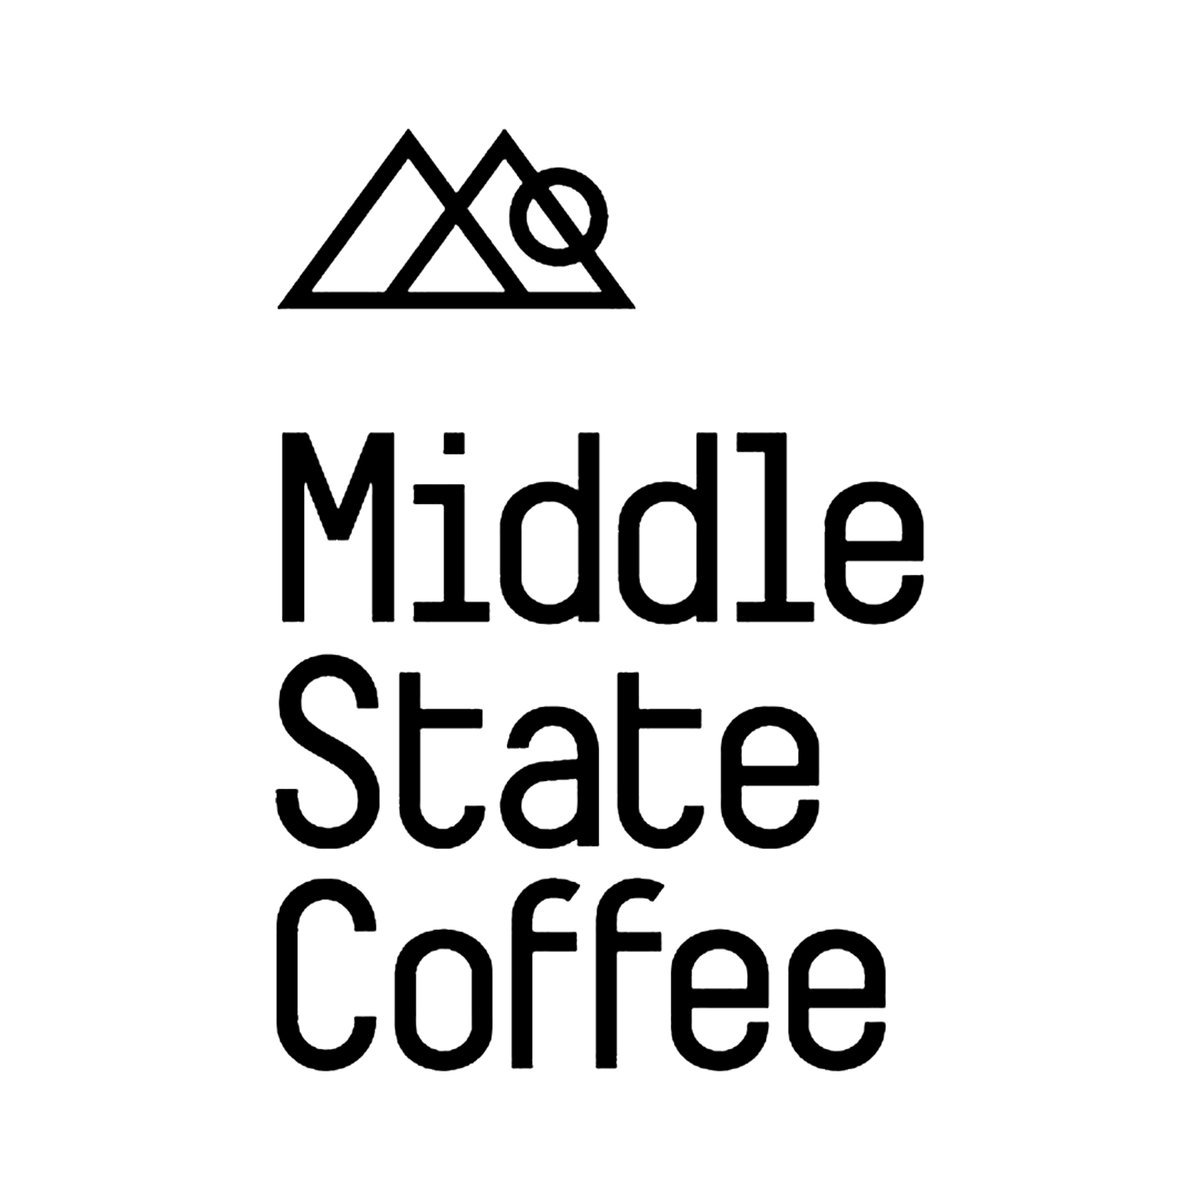 Middle State Coffee.jpg